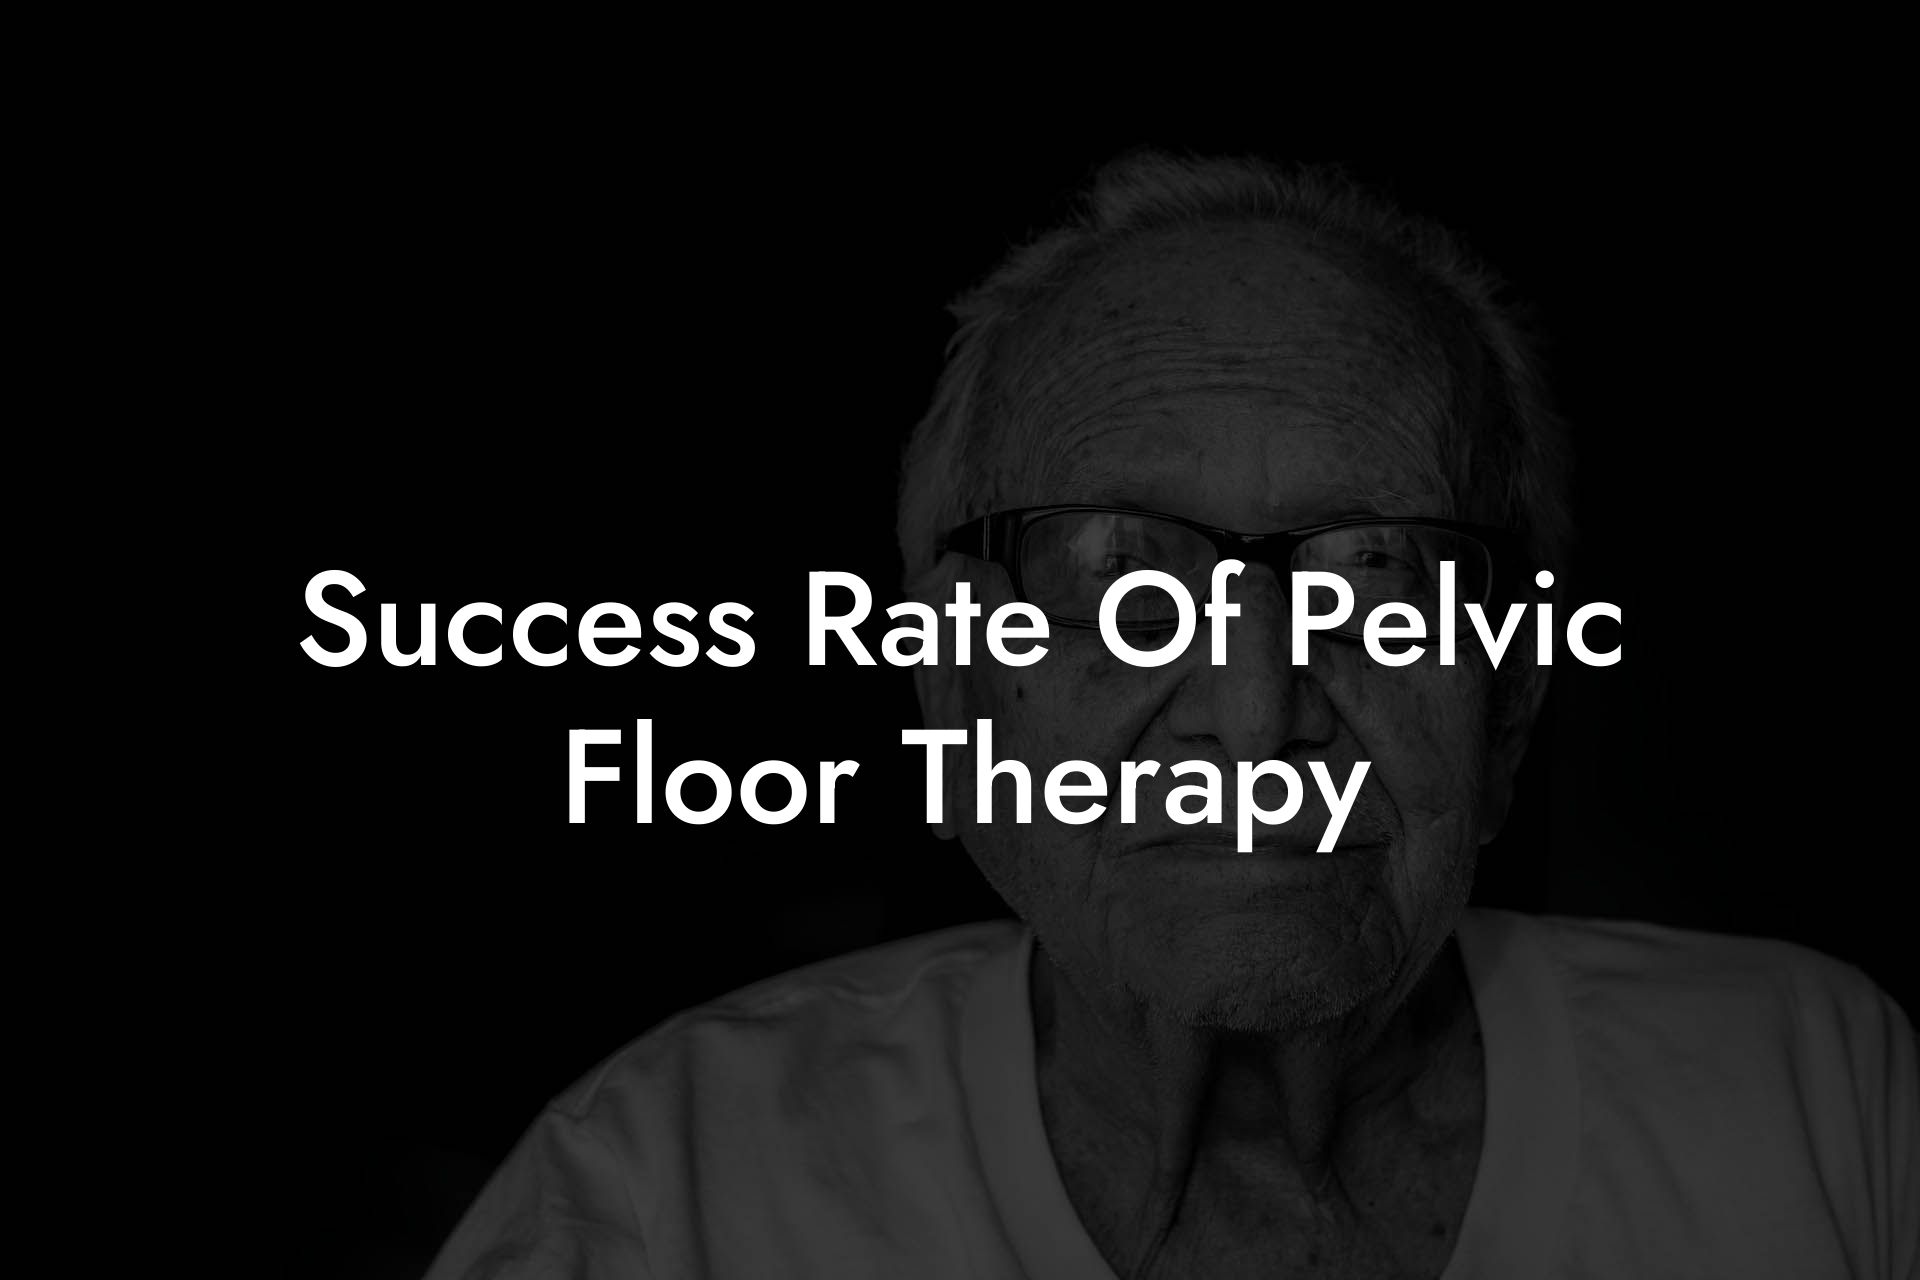 Success Rate Of Pelvic Floor Therapy